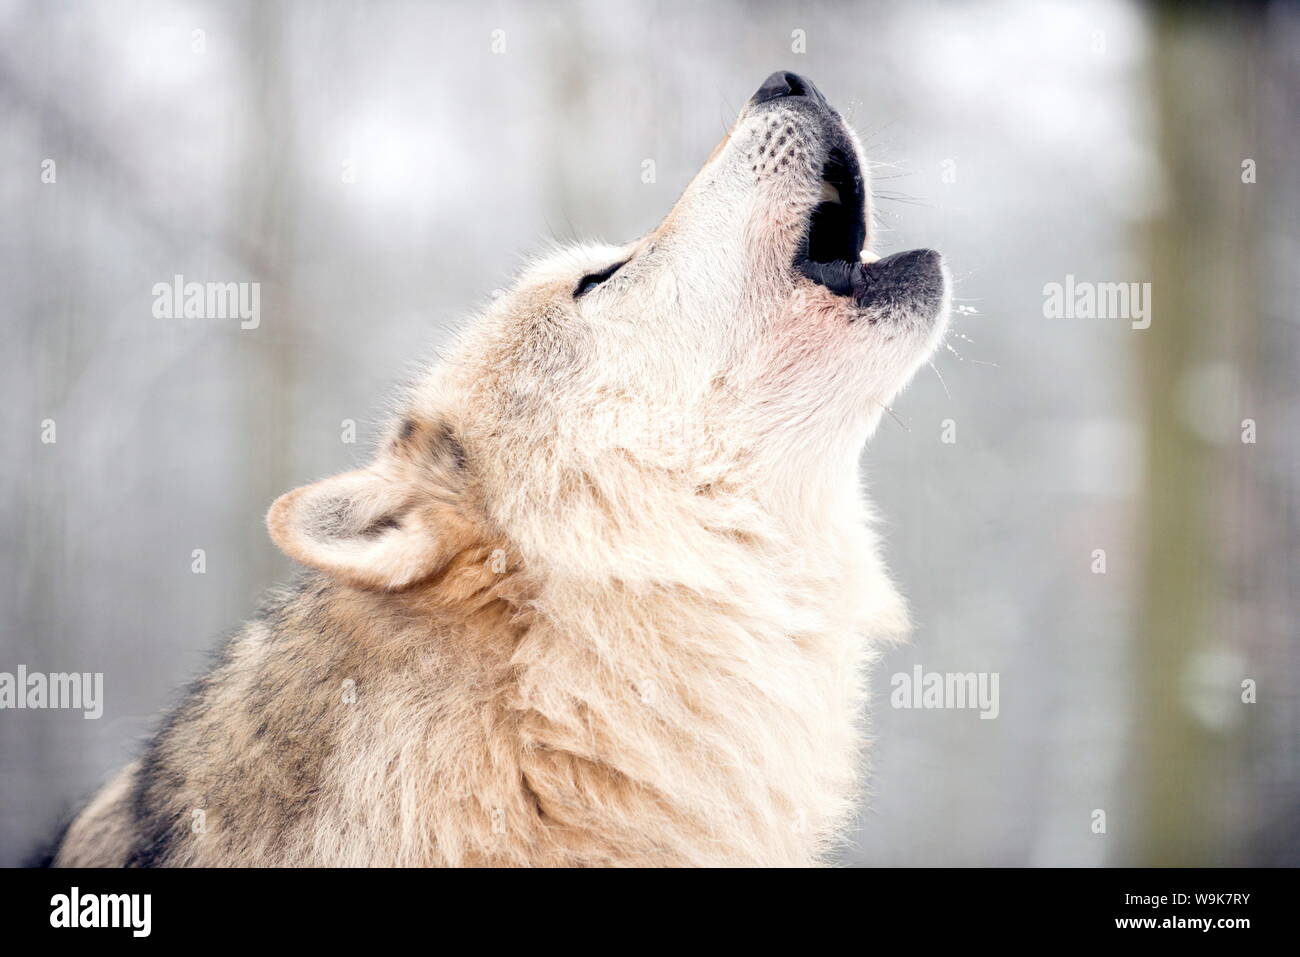 North American timber wolf (Canis Lupus) howling in the snow in forest, Wolf Science Centre, Ernstbrunn, Austria, Europe Stock Photo